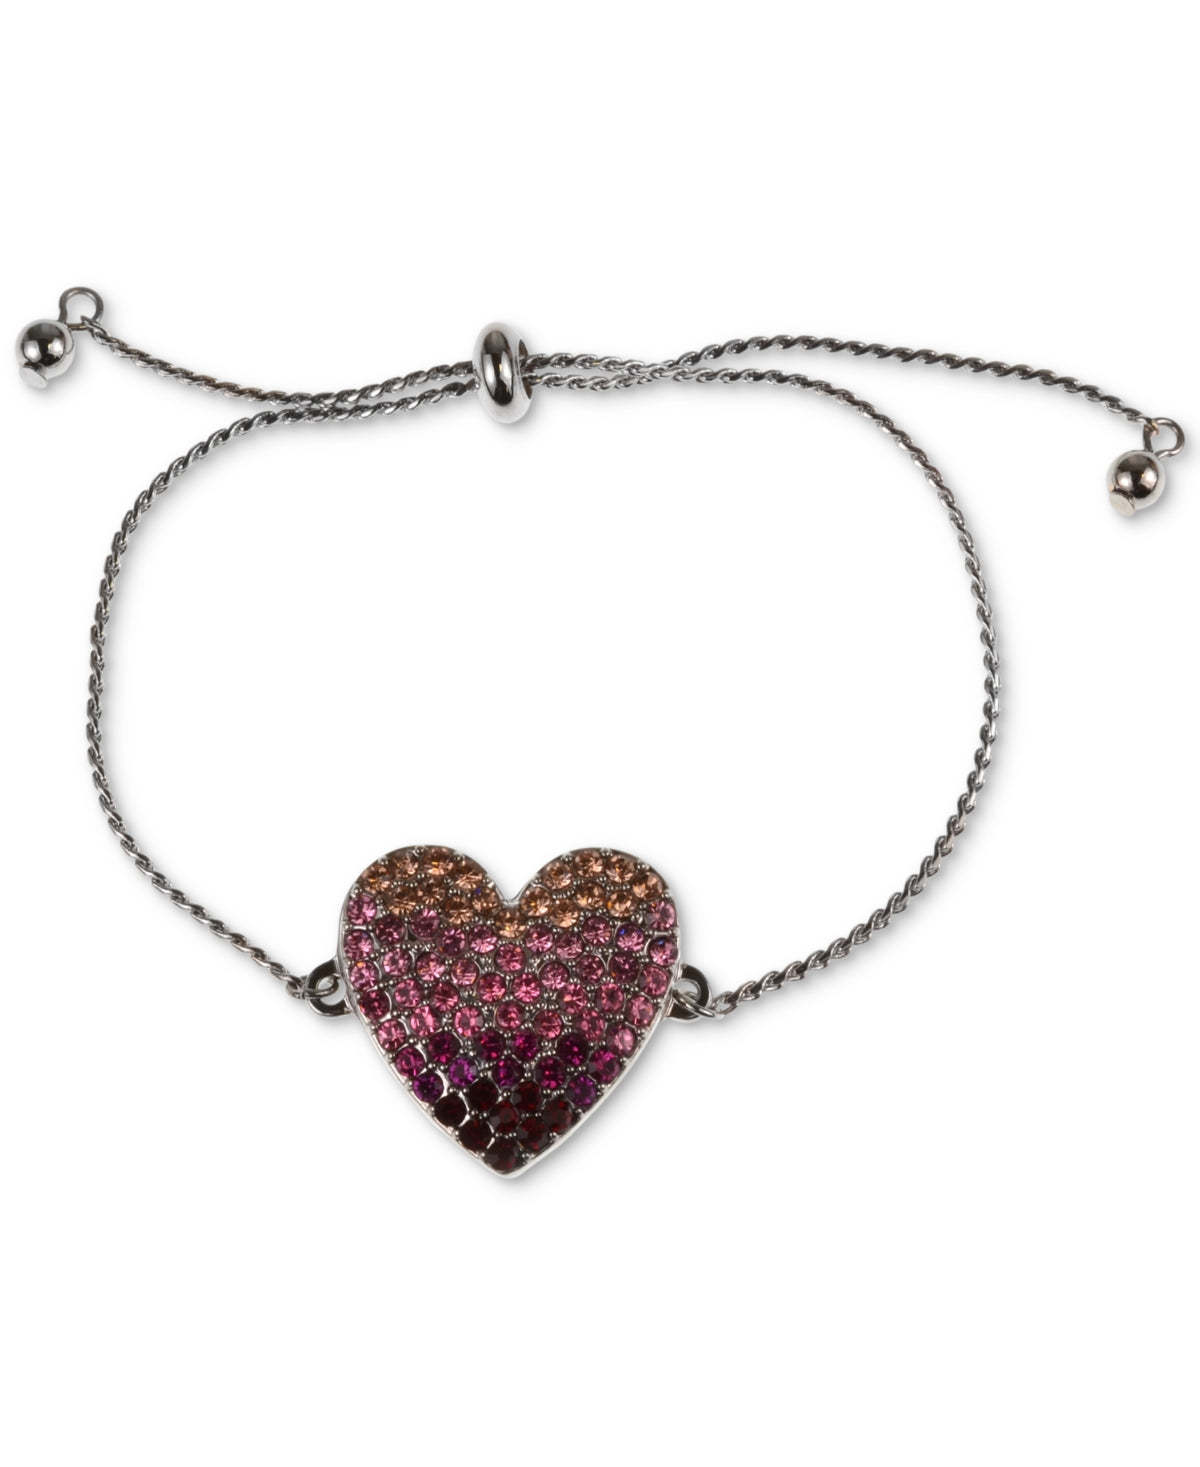 Primary image for Holiday Lane Ombre Stone Heart Slider Bracelet, Silver